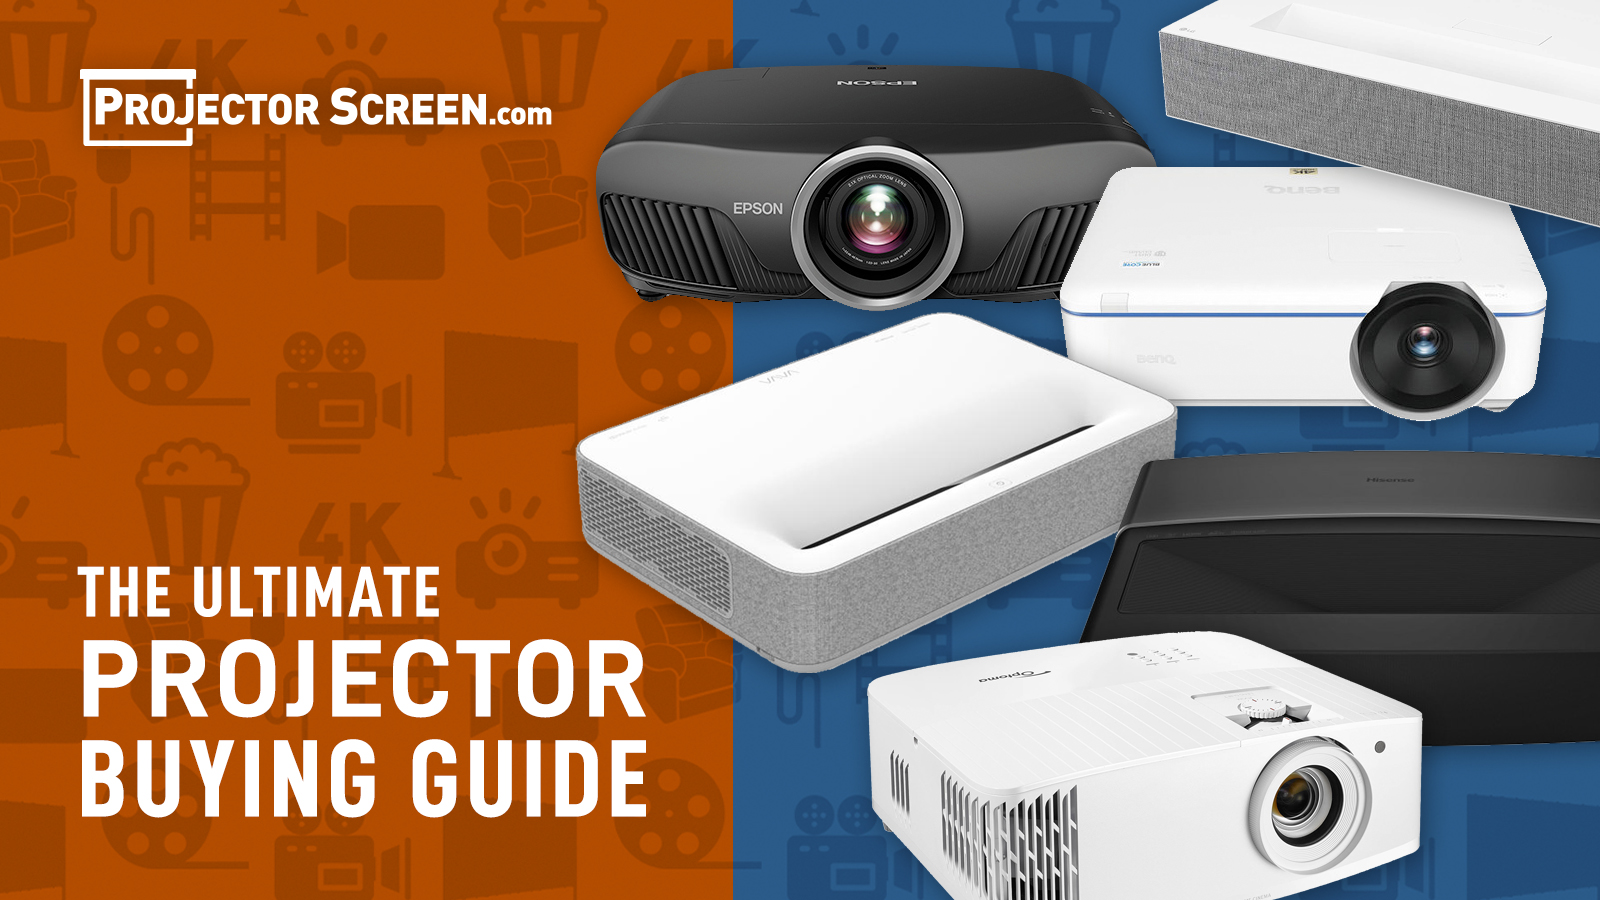 http://www.projectorscreen.com/images/ultimate-projector-guide-cover-r1.jpg